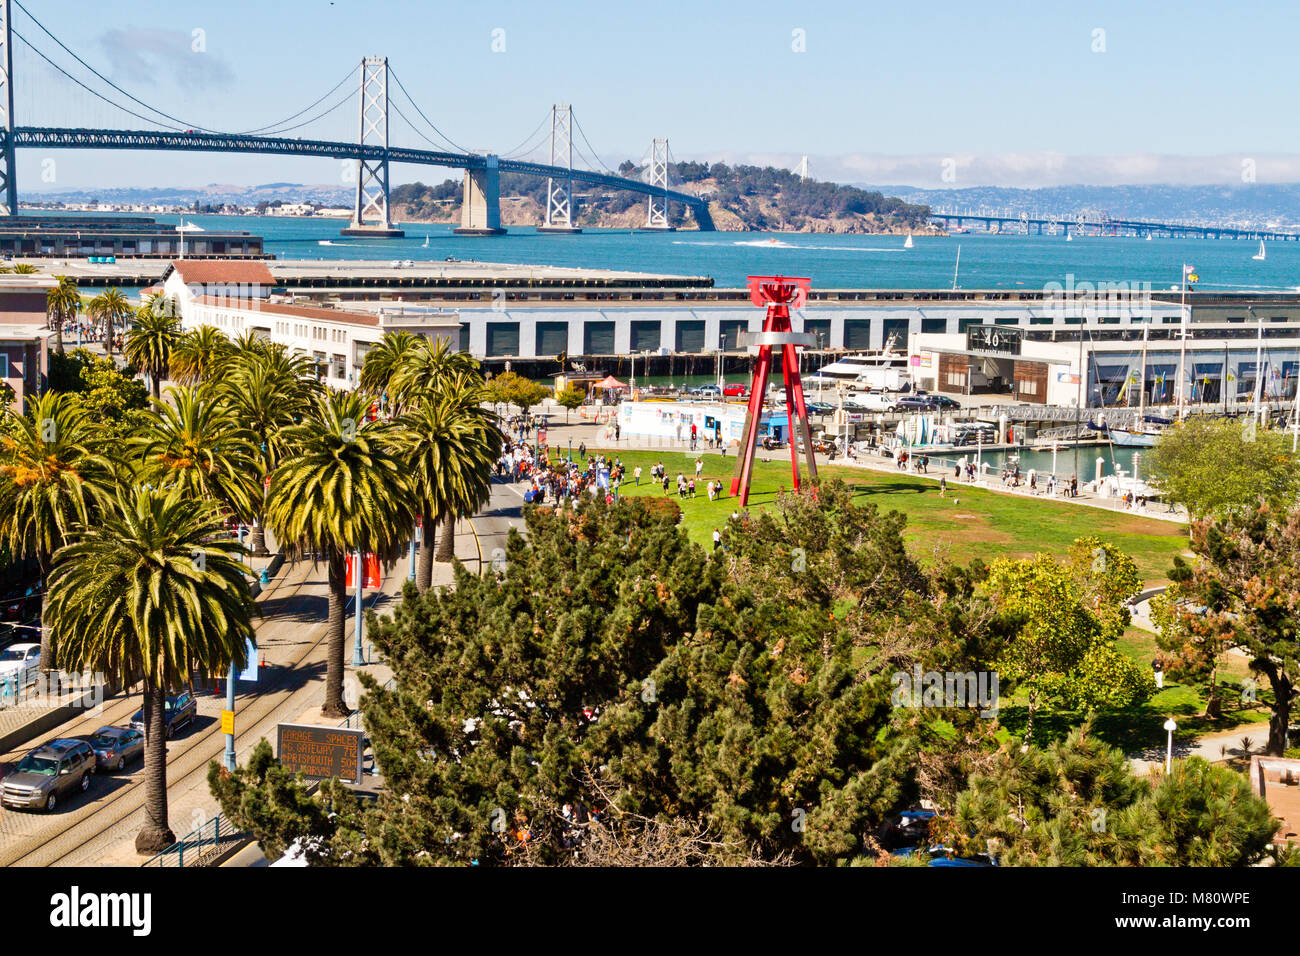 An elevated view of the Embarcadero in San Francisco, CA with the Bay Bridge and Treasure Island in the background. Stock Photo